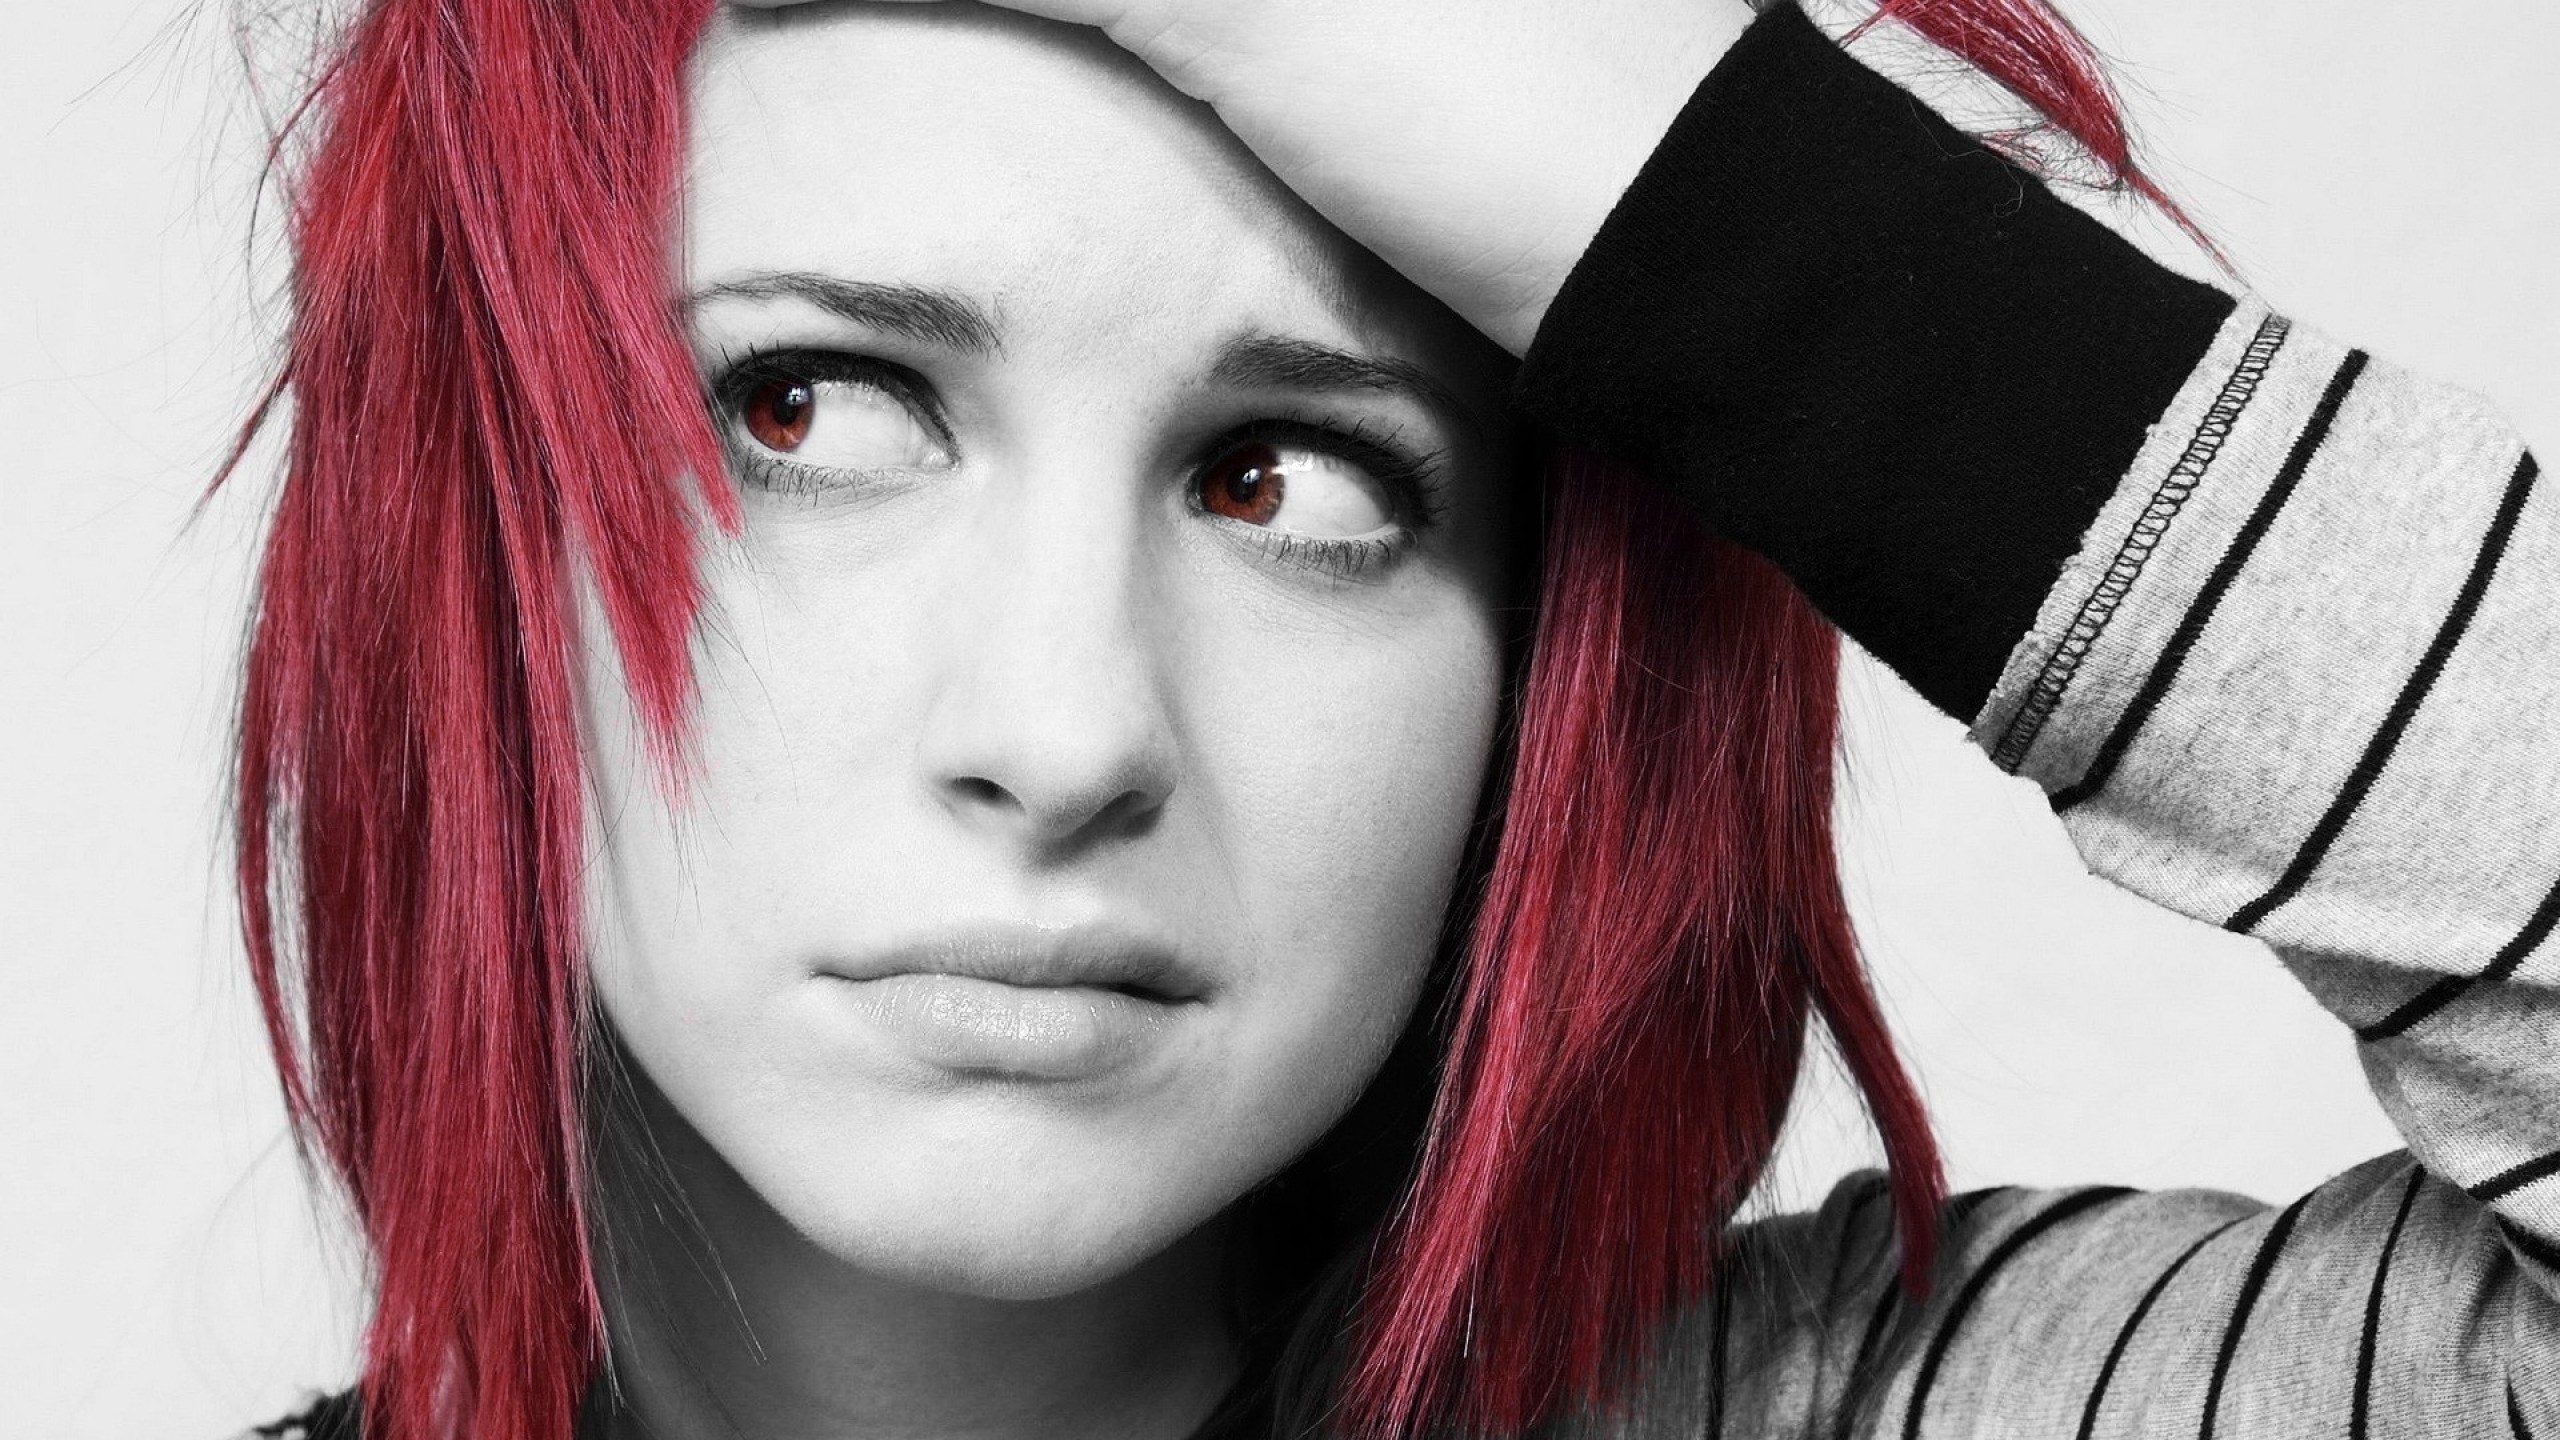 2560x1440 ... 4188549 Paramore Wallpapers | Paramore Backgrounds ...